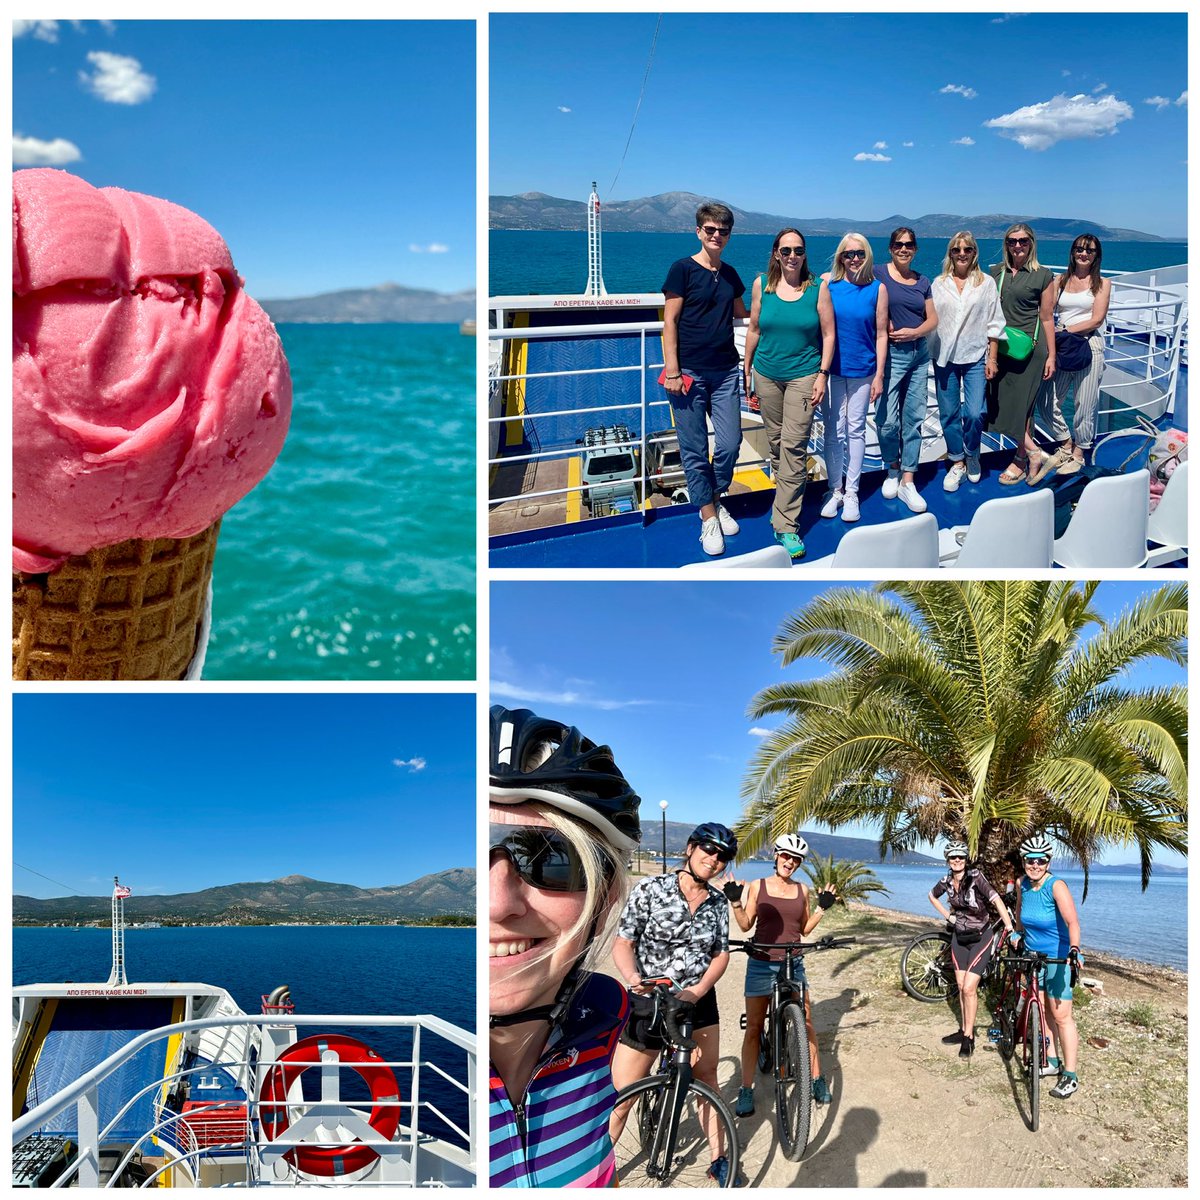 Plane, boat, bike … day 1 of our Greek adventure involved various modes of transport (and the first of what will likely be many ice creams!) 🚴‍♀️🇬🇷